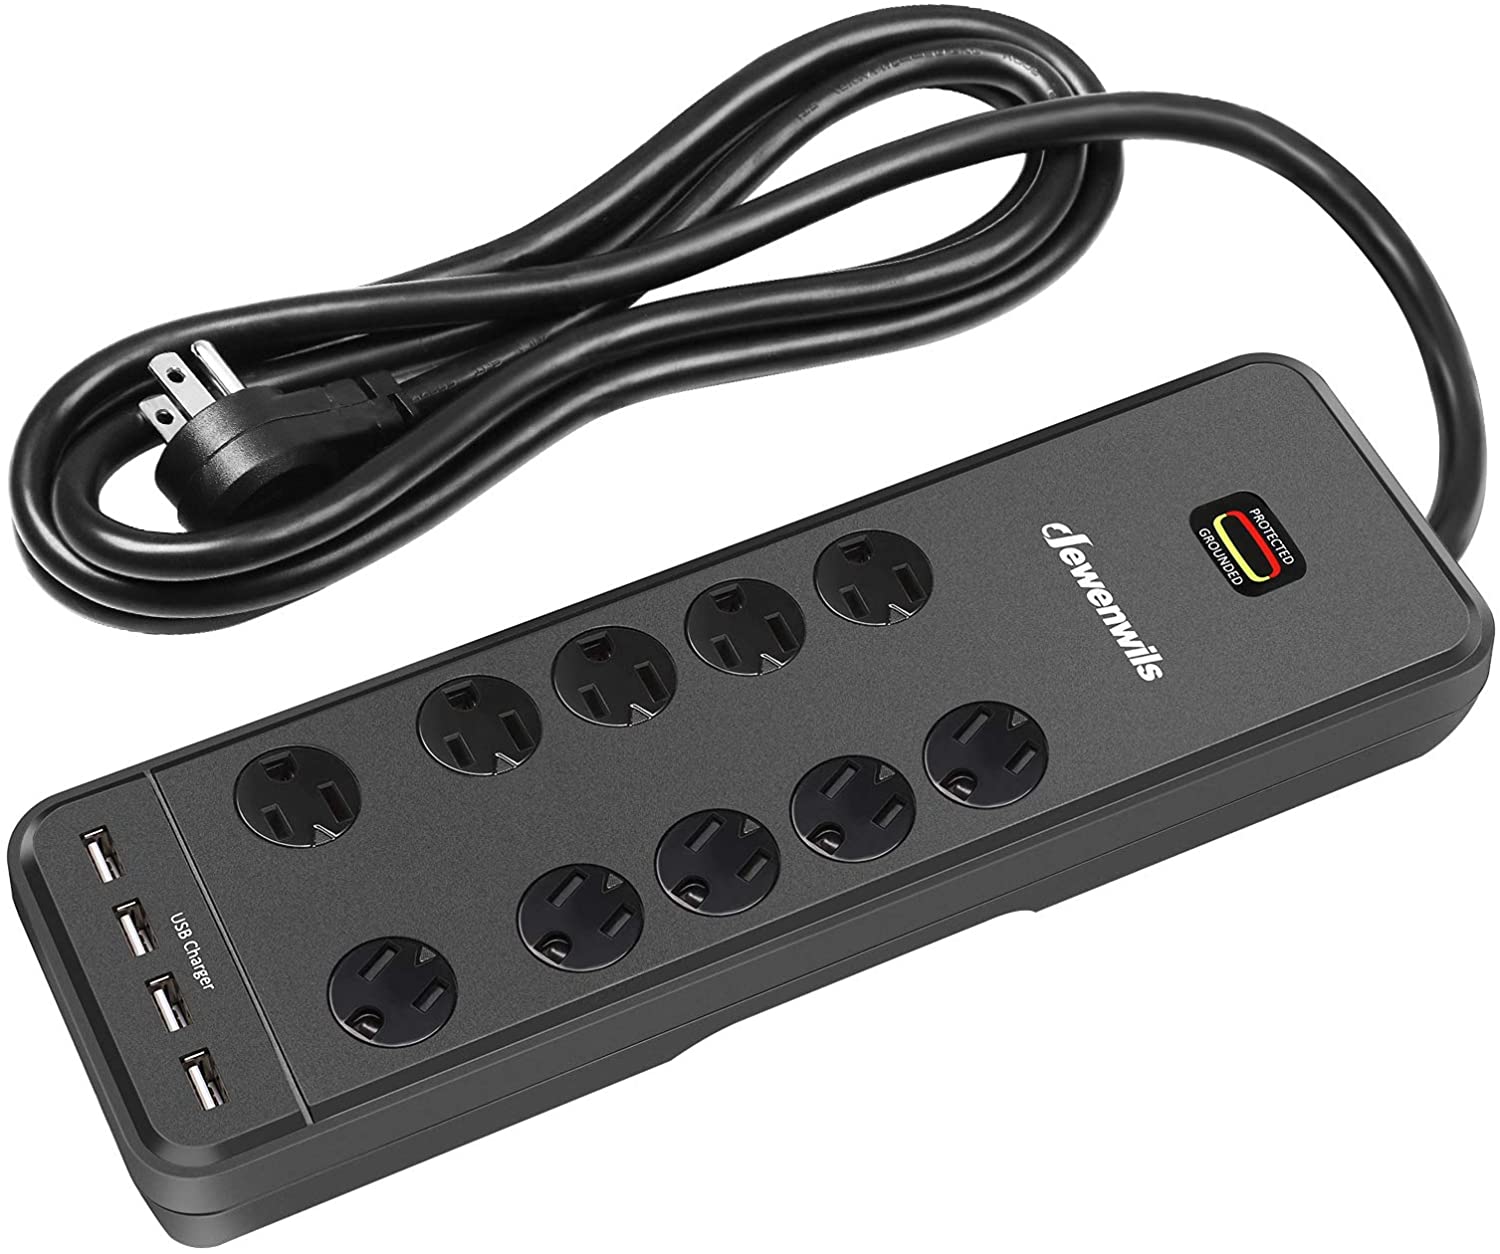 Surge Protector Power Strip with 10-Outlet and 4 USB Ports, 6 FT Flat Plug Extension Cord for Home Office, 2480Joules, 15A Circuit Breaker, Wall Mountable, Black, UL Listed